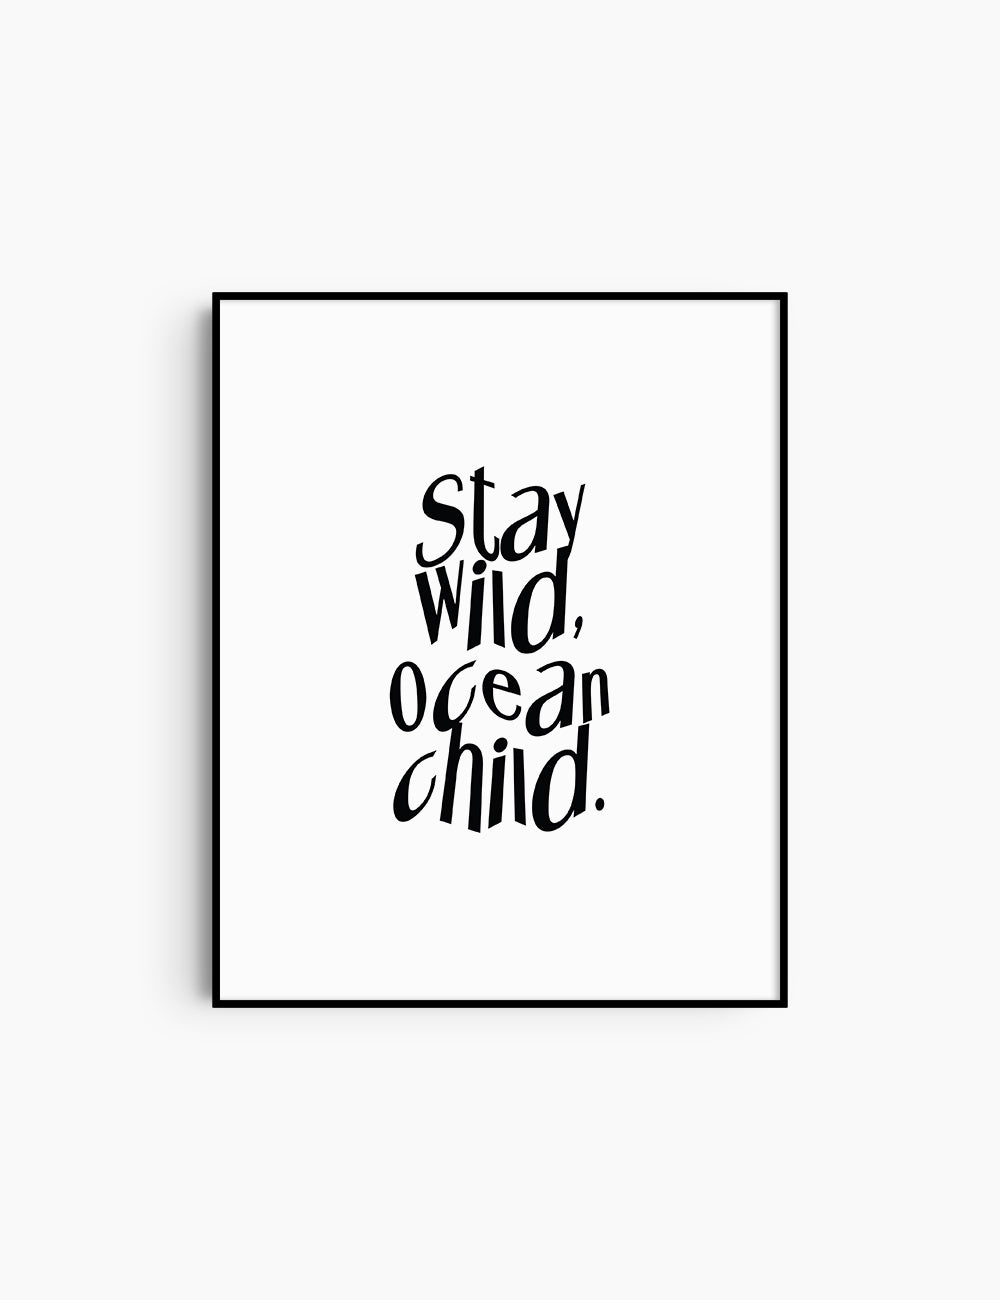 STAY WILD, OCEAN CHILD. Black and White. Printable Wall Art Quote